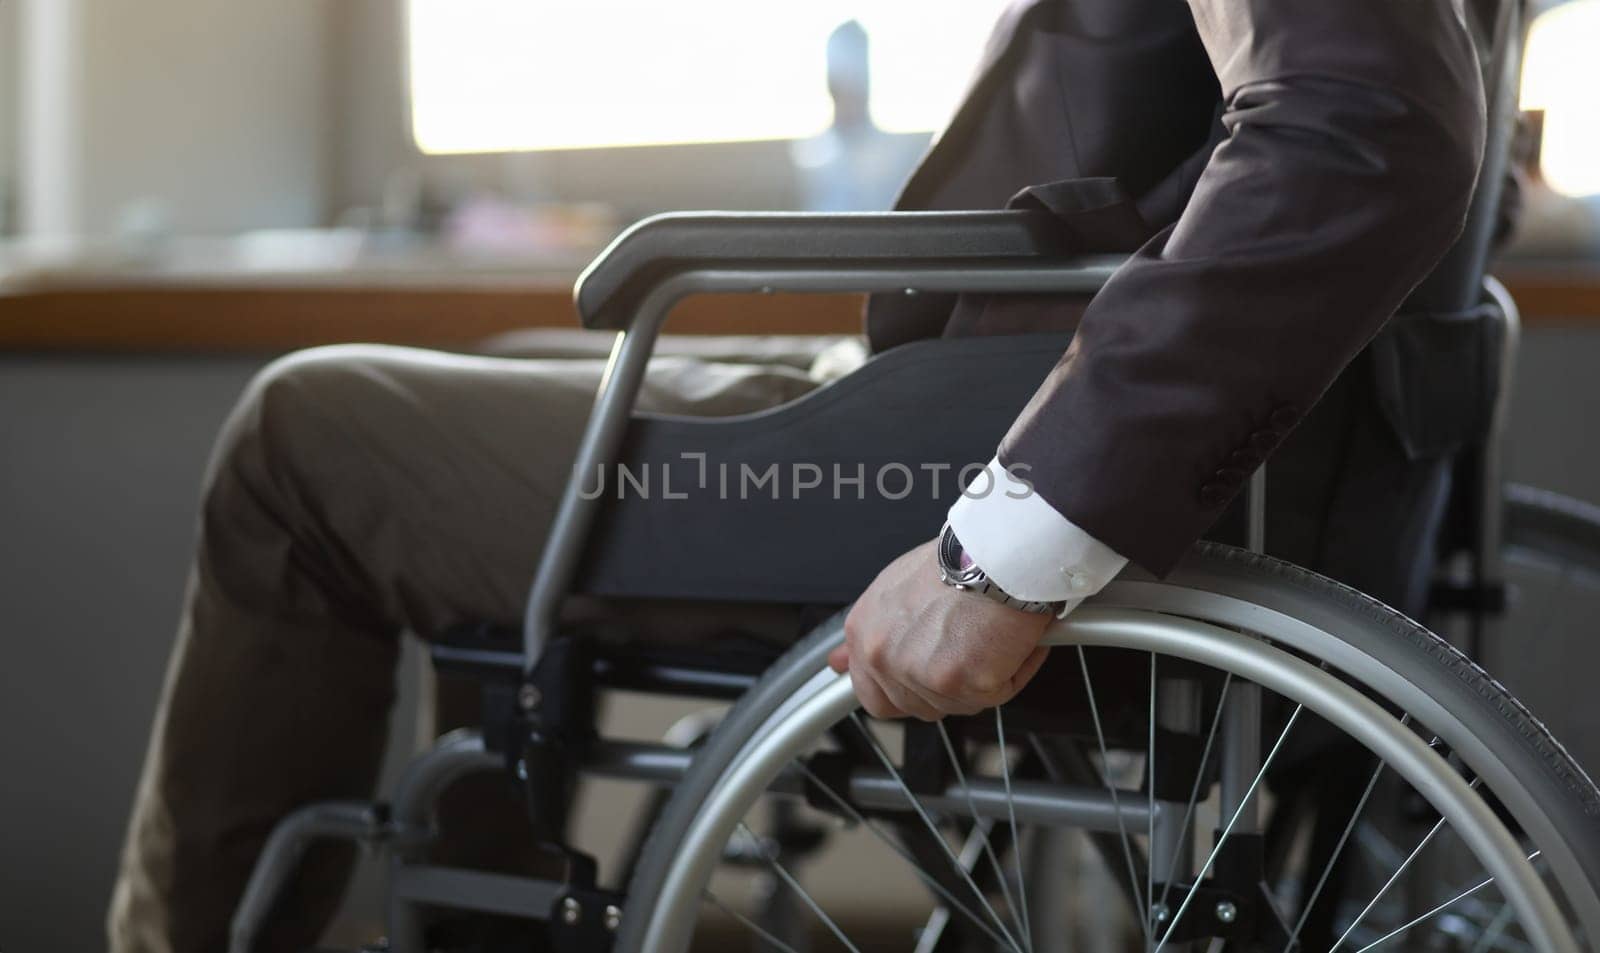 Close-up of disabled man on wheelchair in office wearing presentable suit. Adaptation of people with disabilities in society. Recovery and healthcare concept